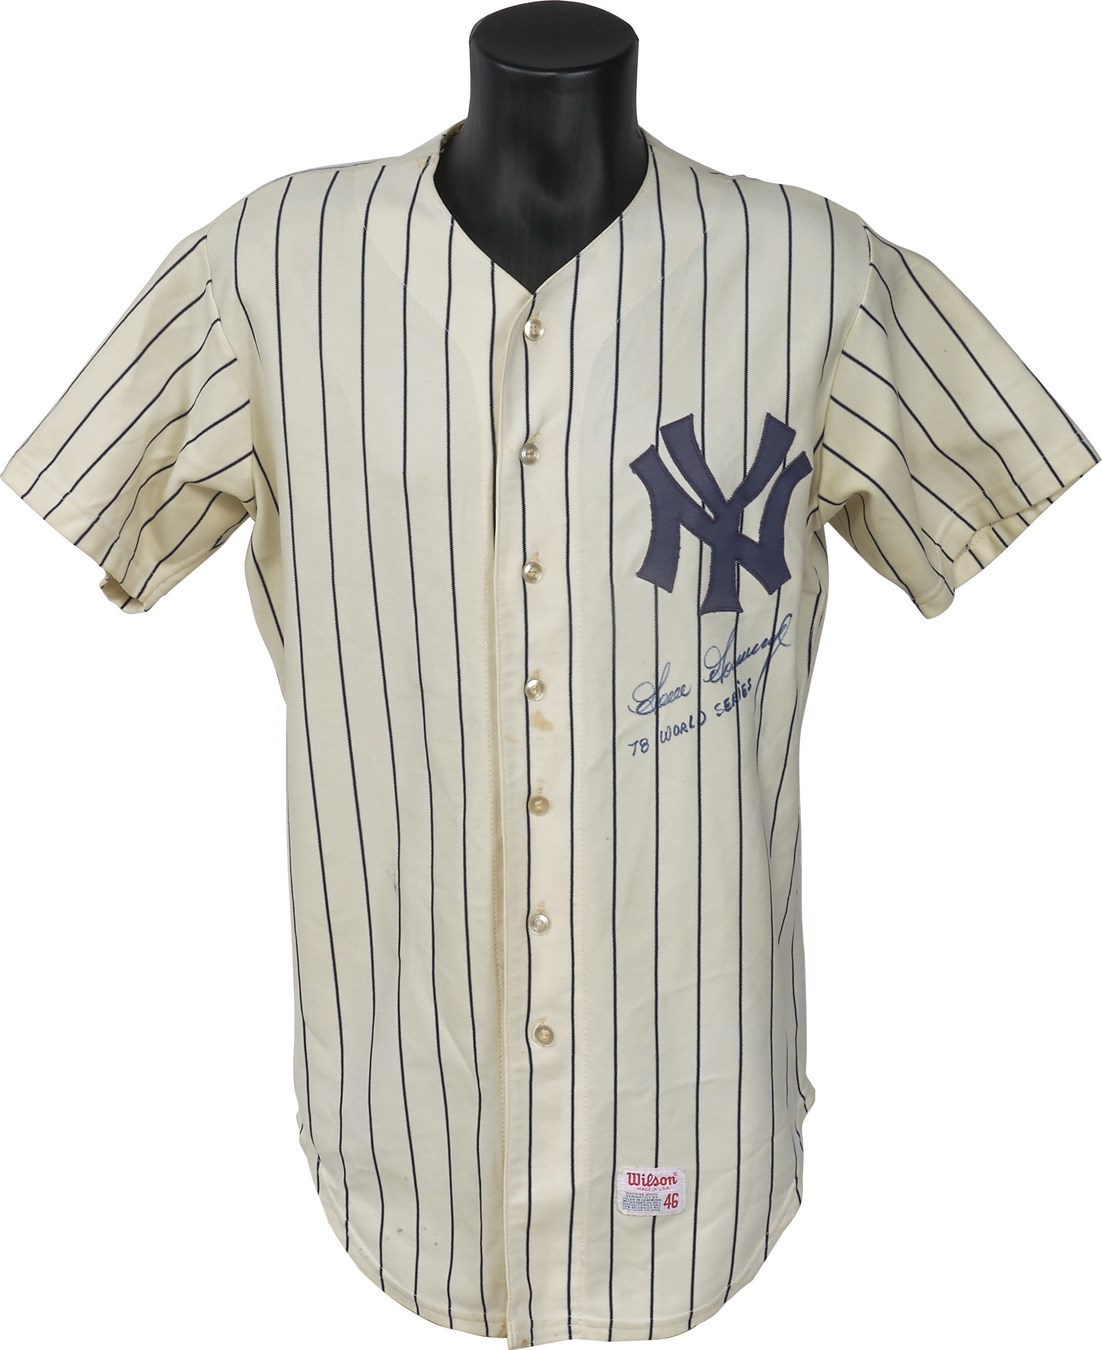 - 1978 Rich "Goose" Gossage World Champion New York Yankees Game Worn Jersey - Photomatched to Iconic Photo with Munson